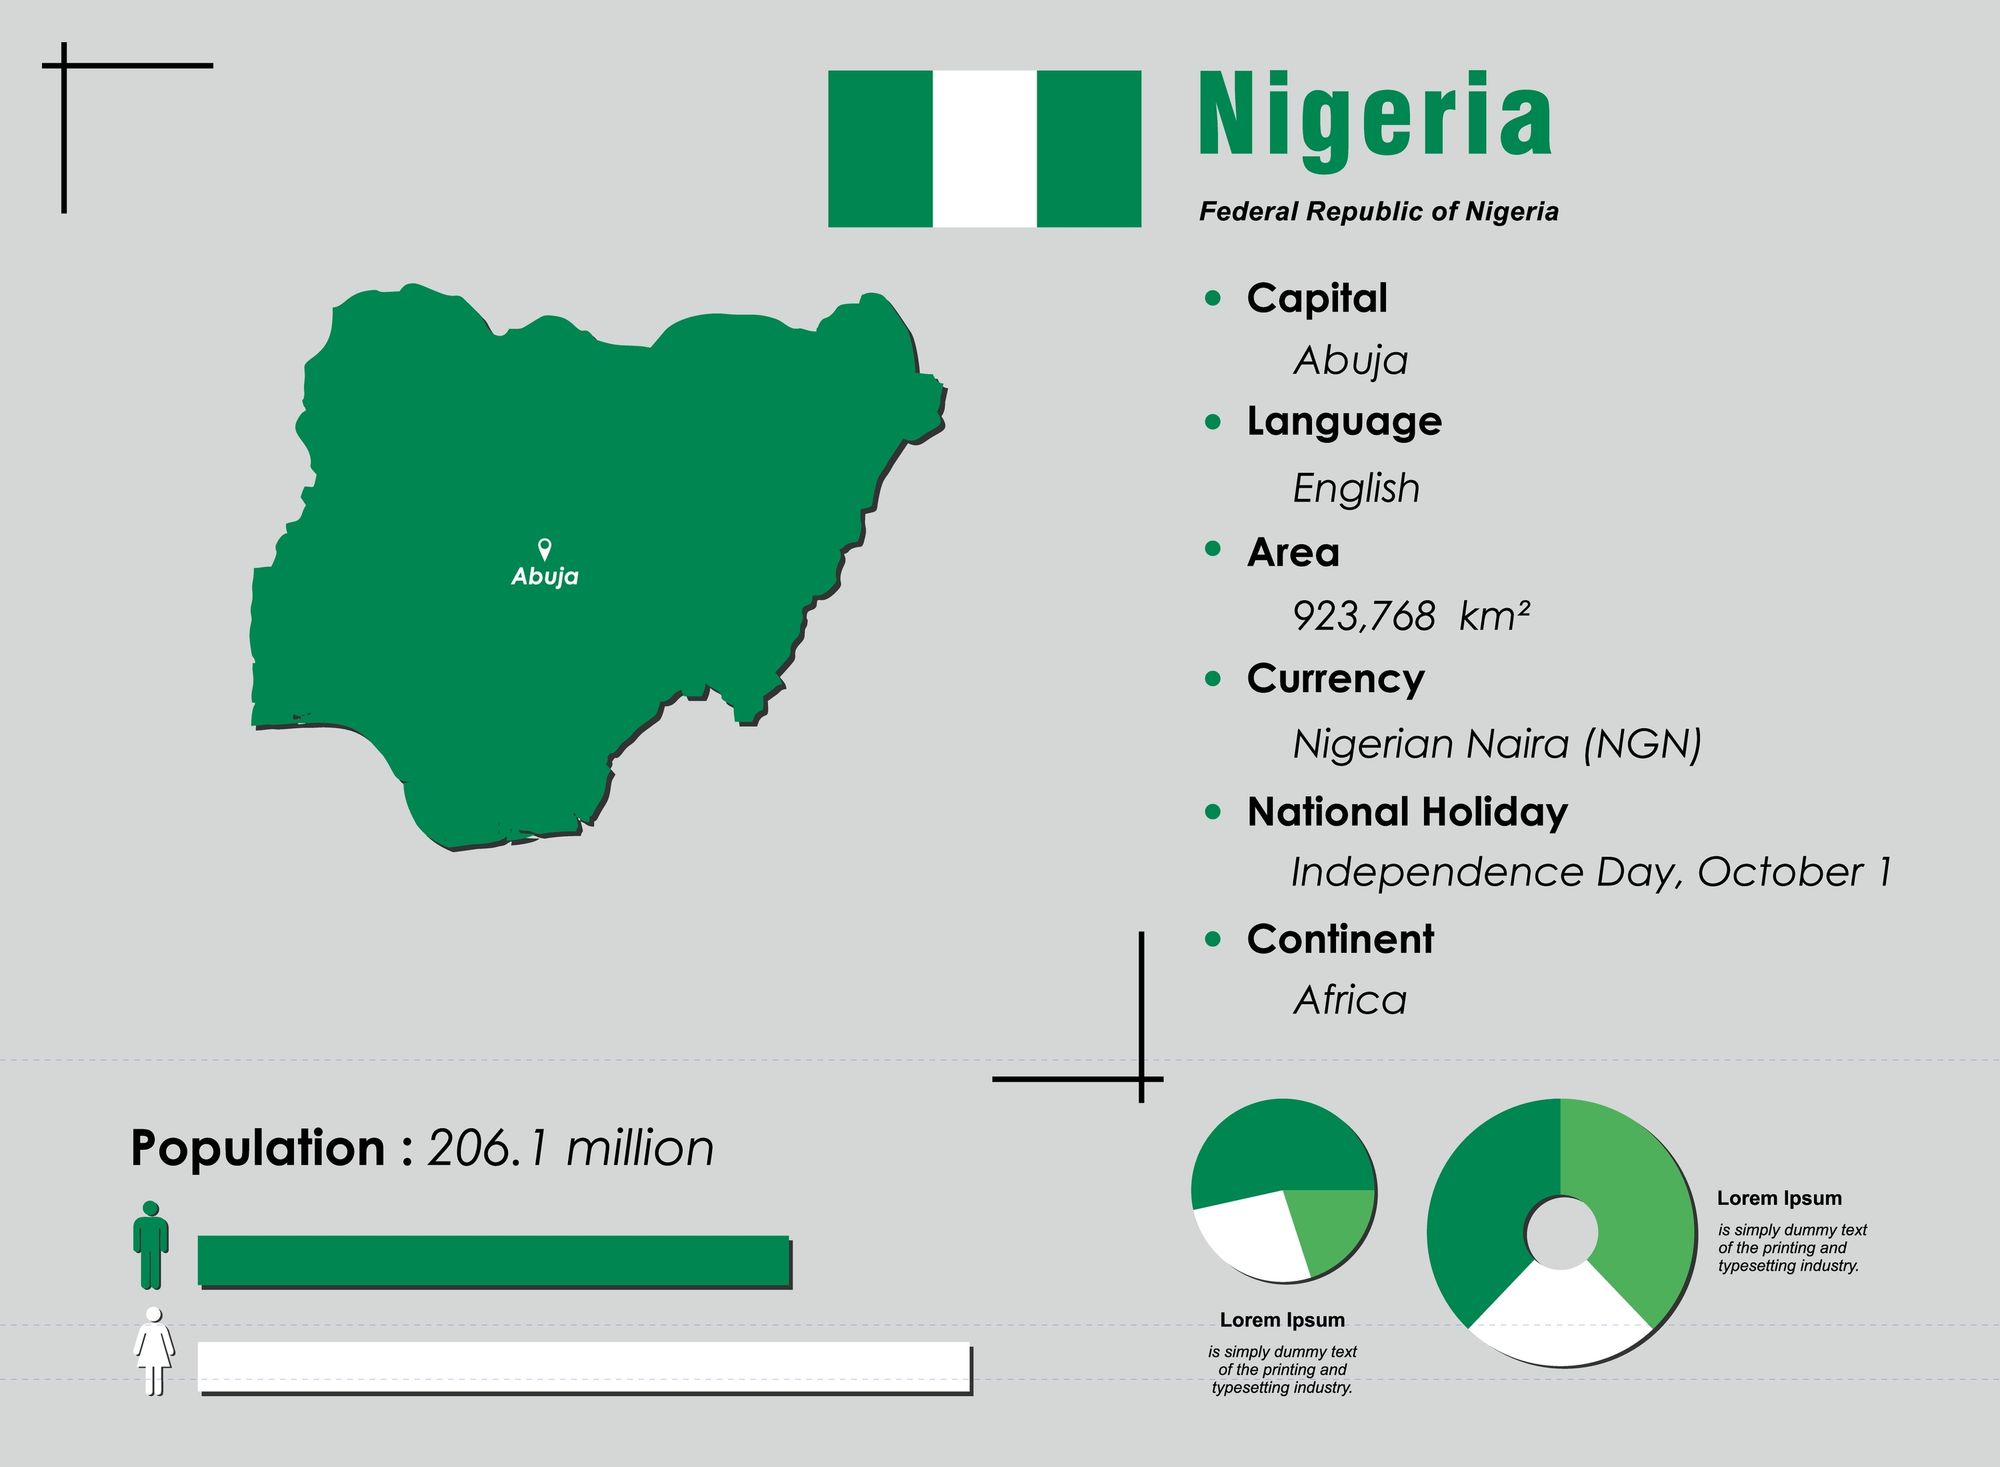 5 Things You Didn't Know About Nigeria